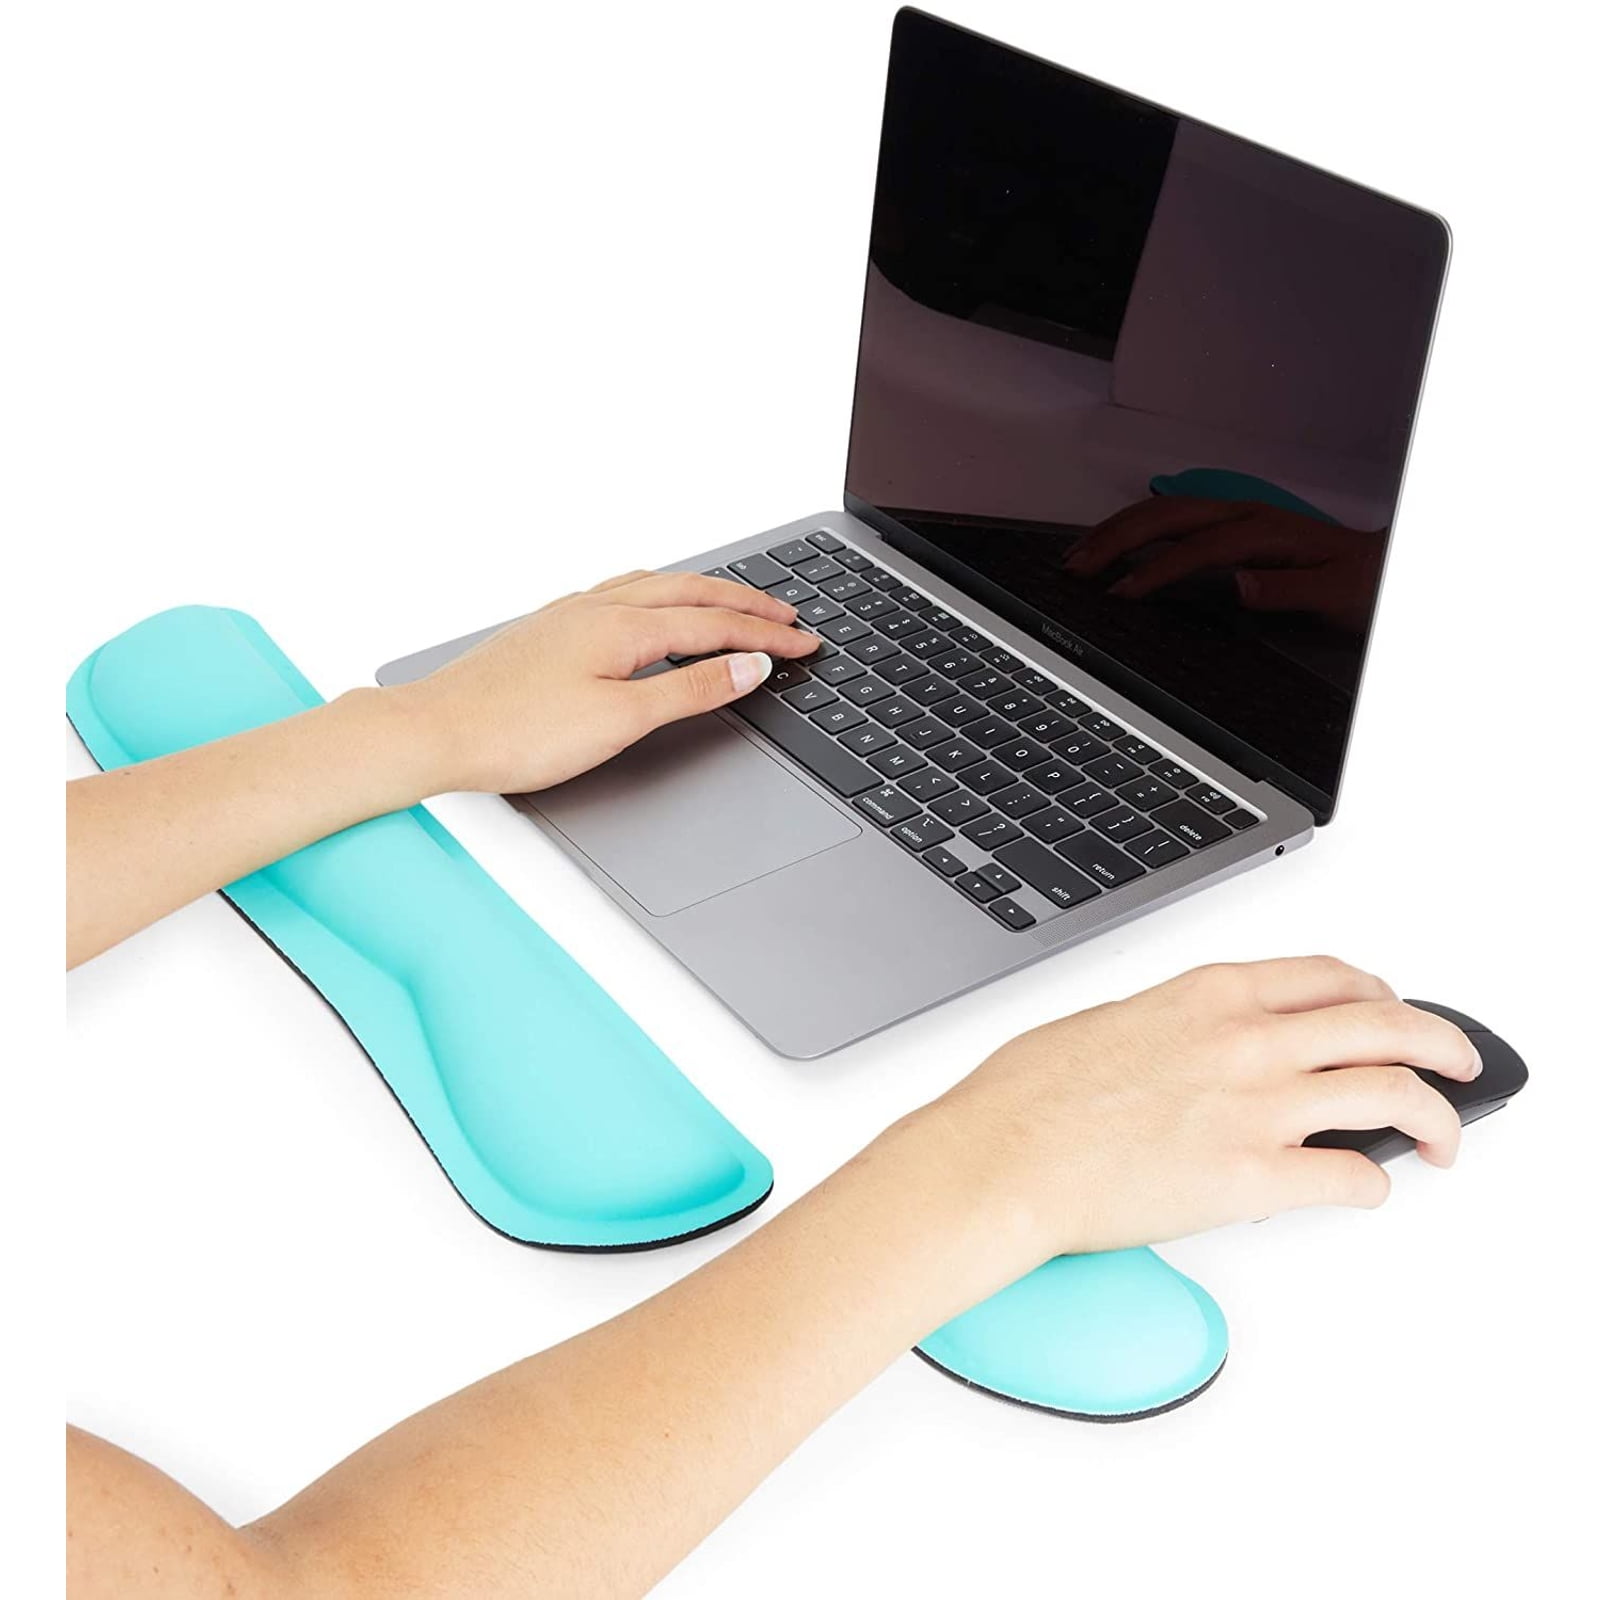 Keyboard Wrist Rest and Mouse Pad Wrist Rest Set with Gel Wrist Support for Relieve Wrist Pain Compact Perfect Height Cushion Pad with Ergonomic Acupoint Massage Support - Mandala Typist Avid Gamer